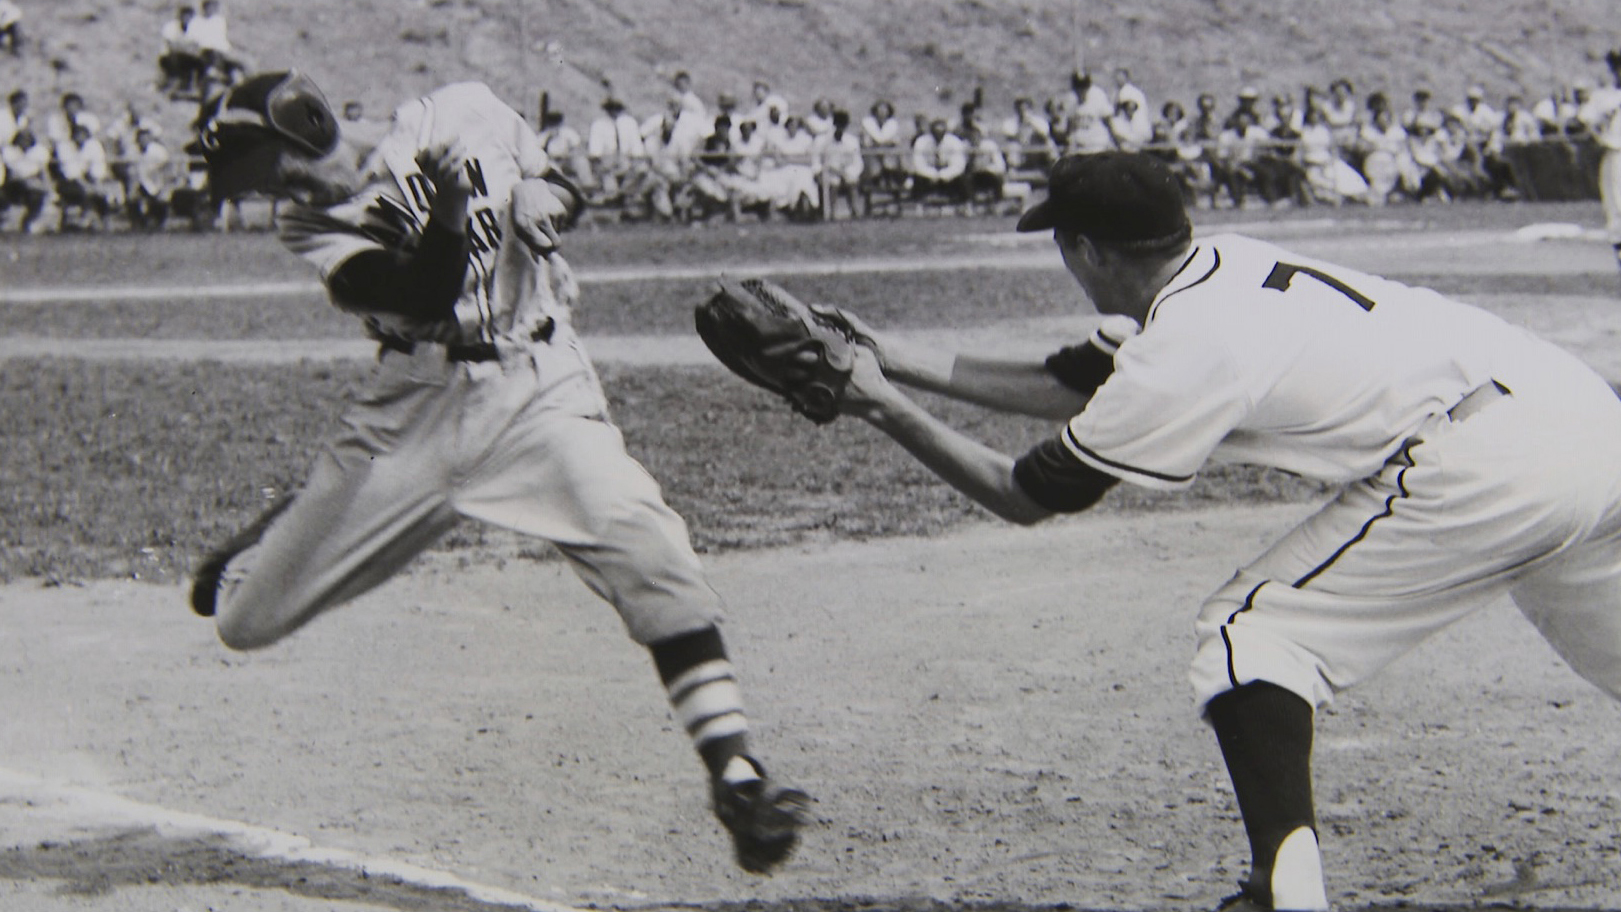 Monongahela player is safe at third in the PONY League World Series 1954 (Photo Credit - PONY Baseball)